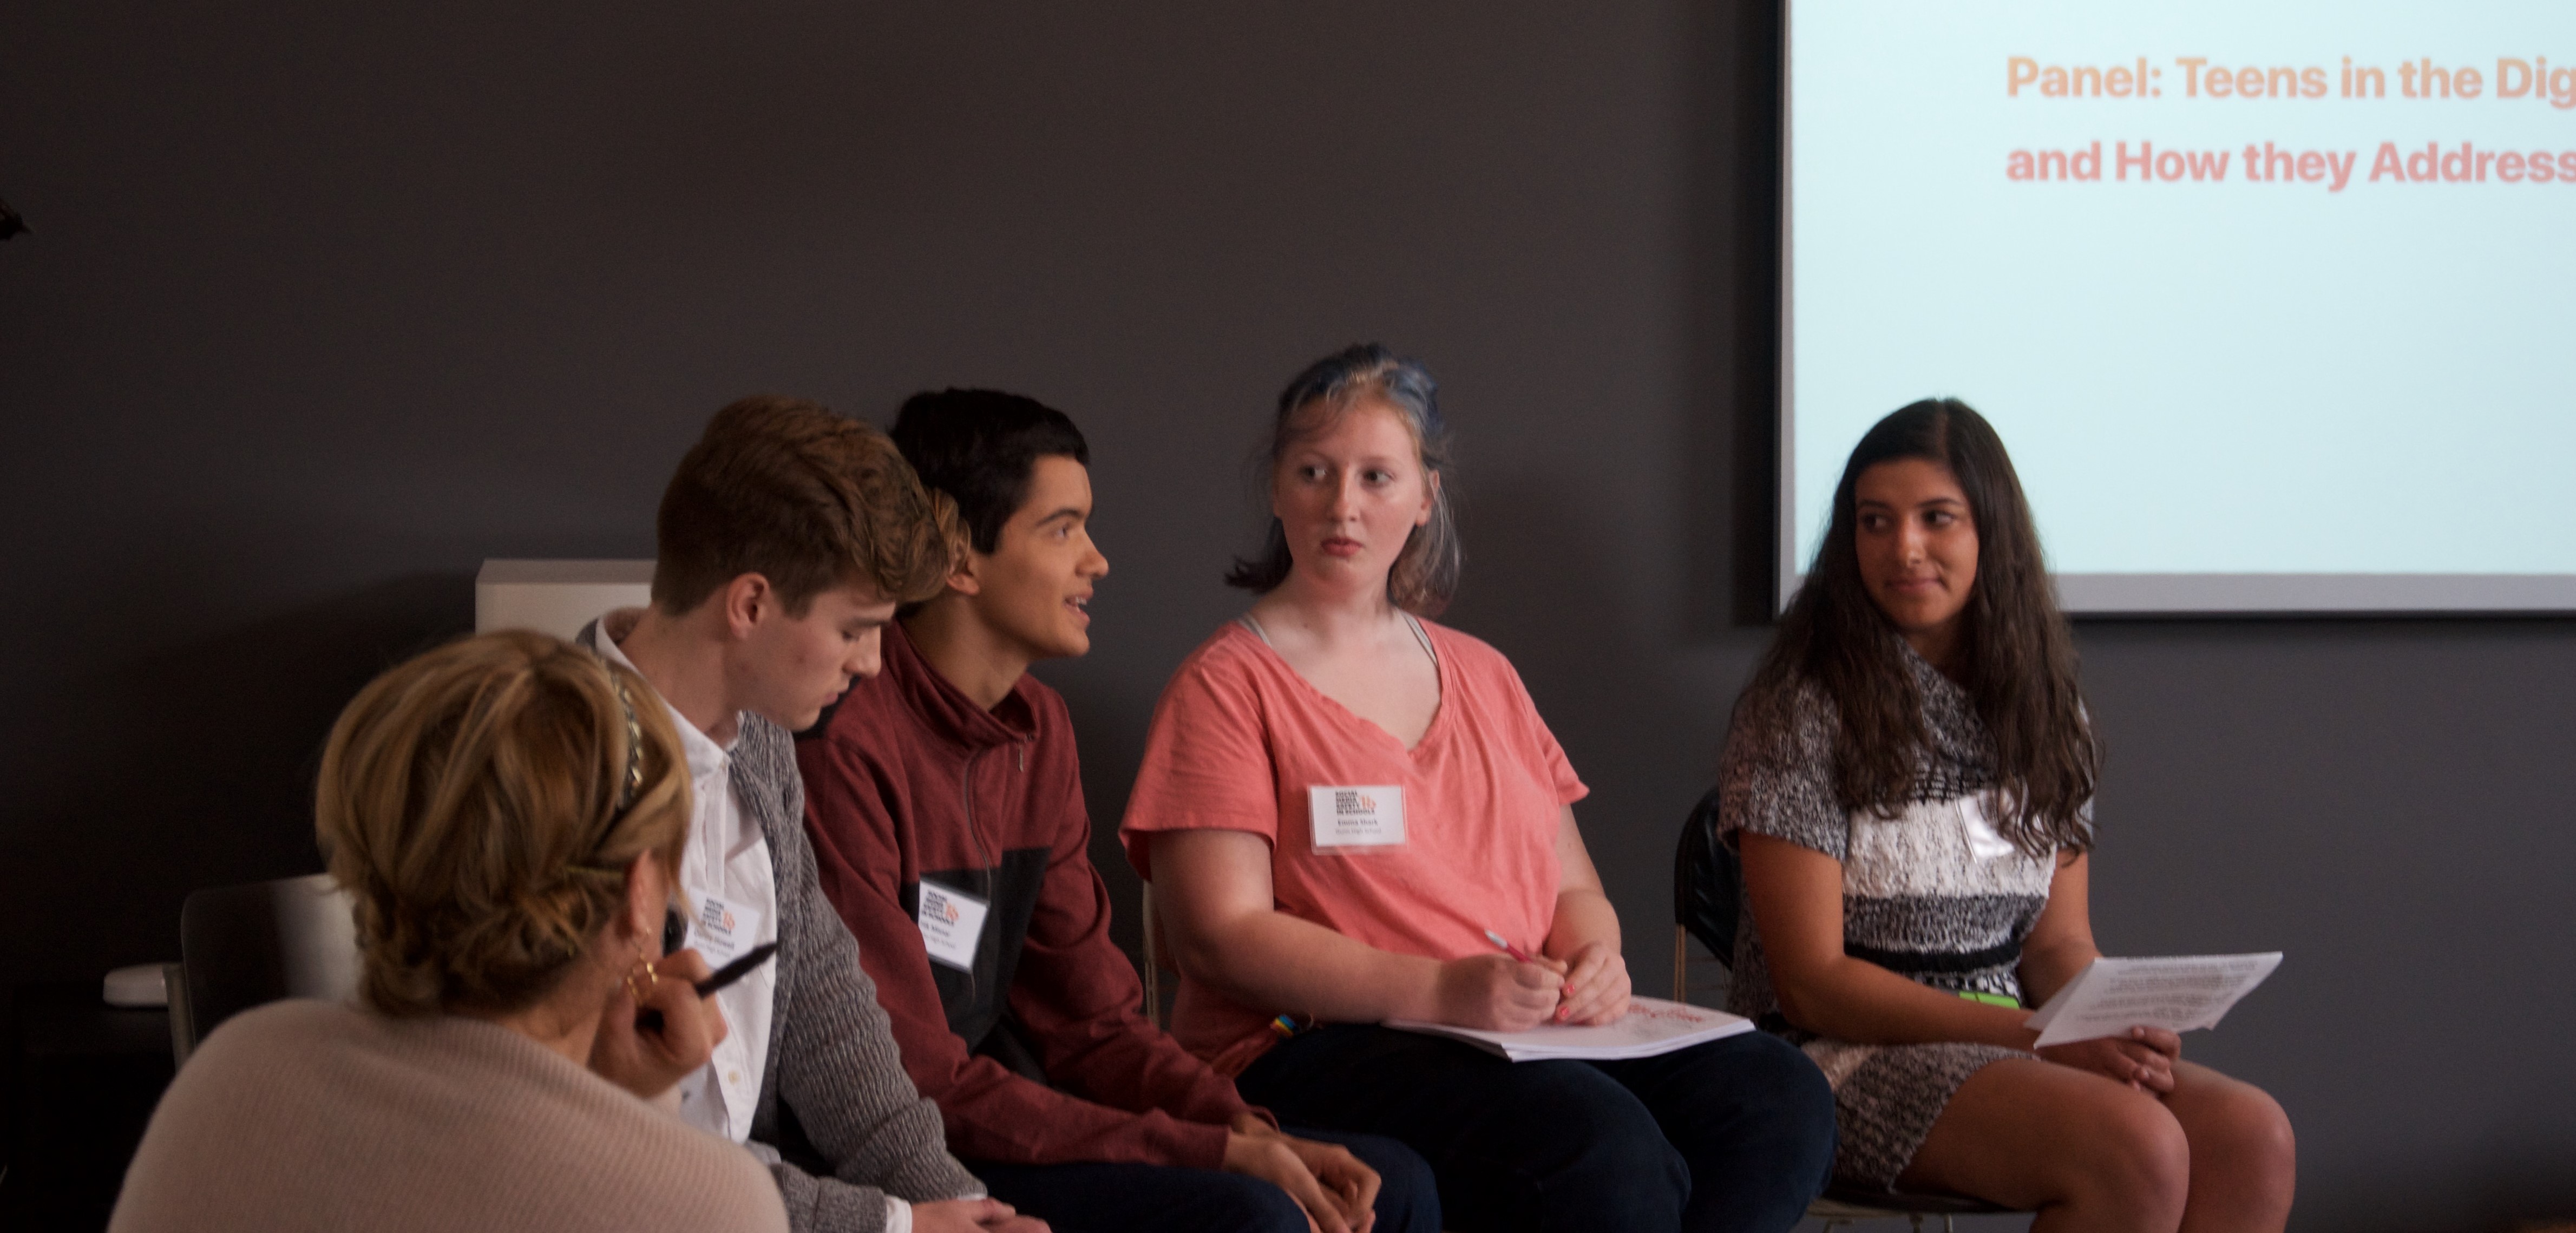 Teens at the 2018 Social Media Safety in Schools event discuss the role social media plays in their lives and how they approach their own mental health. 

The one-day event focused on preventing teen suicide and promoting positive mental health in teens using technology and social media. 